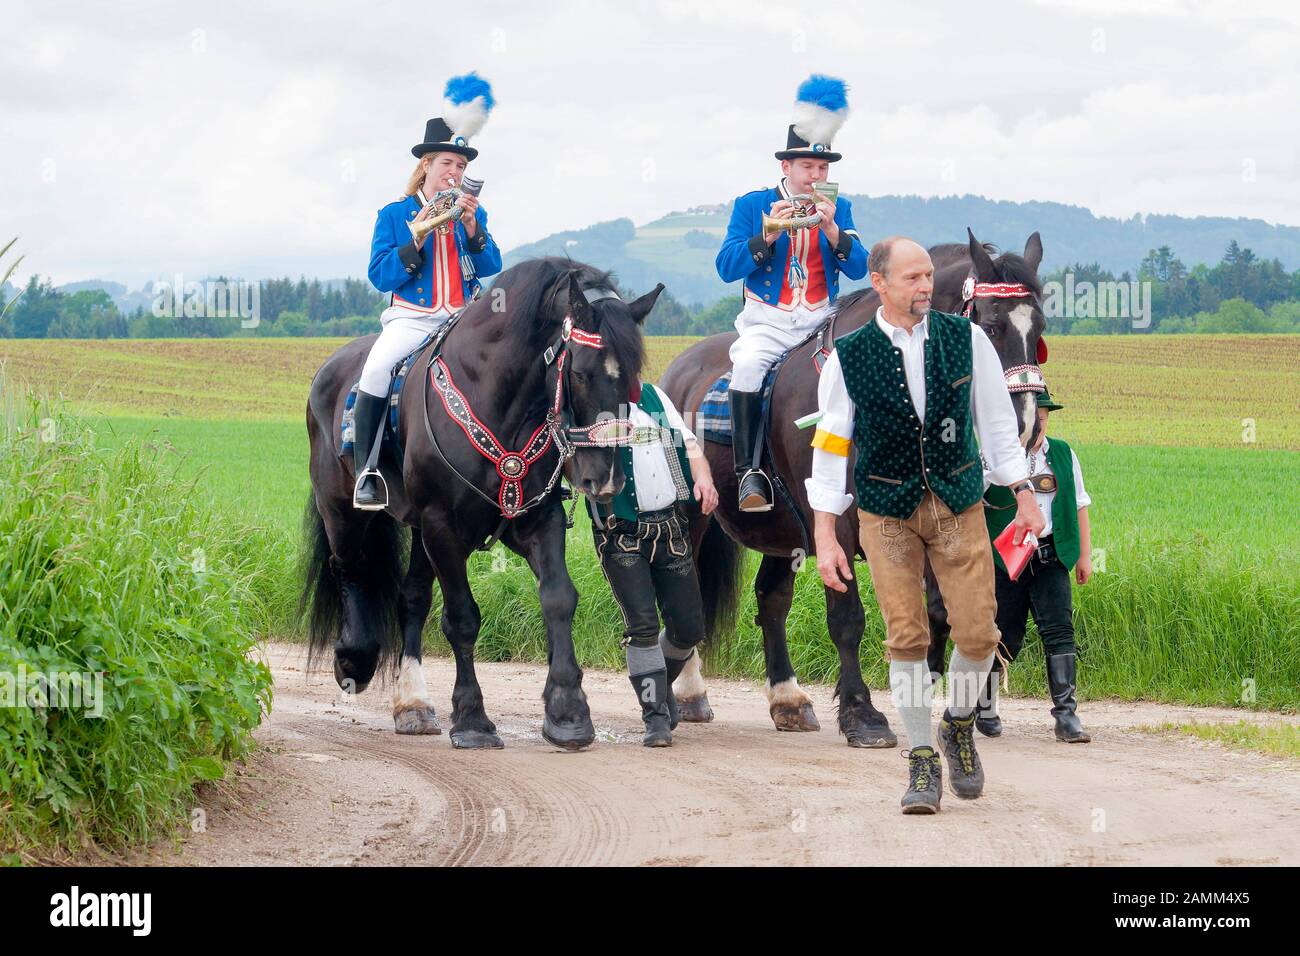 the traditional Leonhardiritt in Holzhausen - Teisendorf, Upper Bavaria, the ride is first mentioned in a document in 1612, the beautifully dressed horses are blessed, Germany [automated translation] Stock Photo